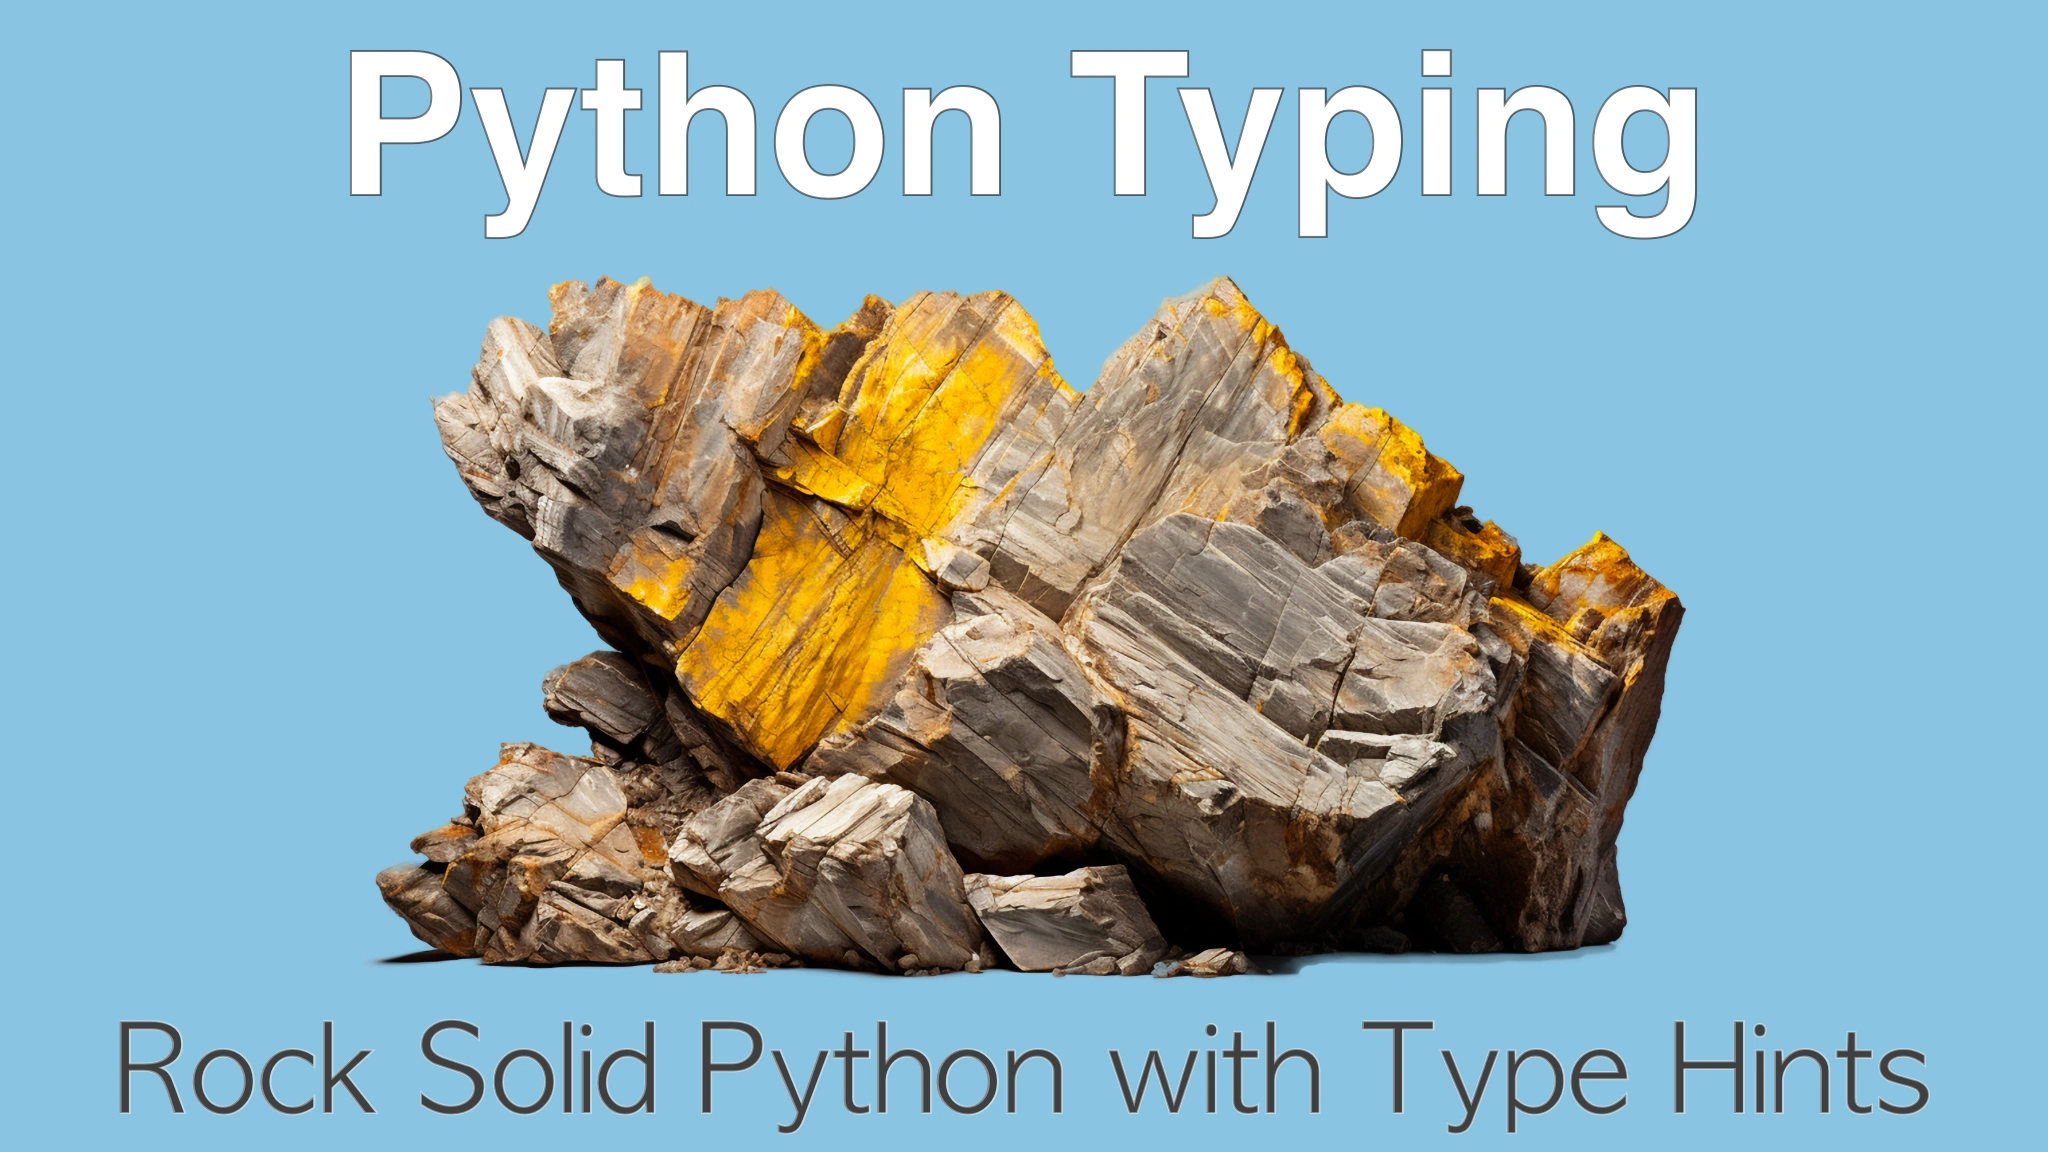 Course: Rock Solid Python with Python Typing